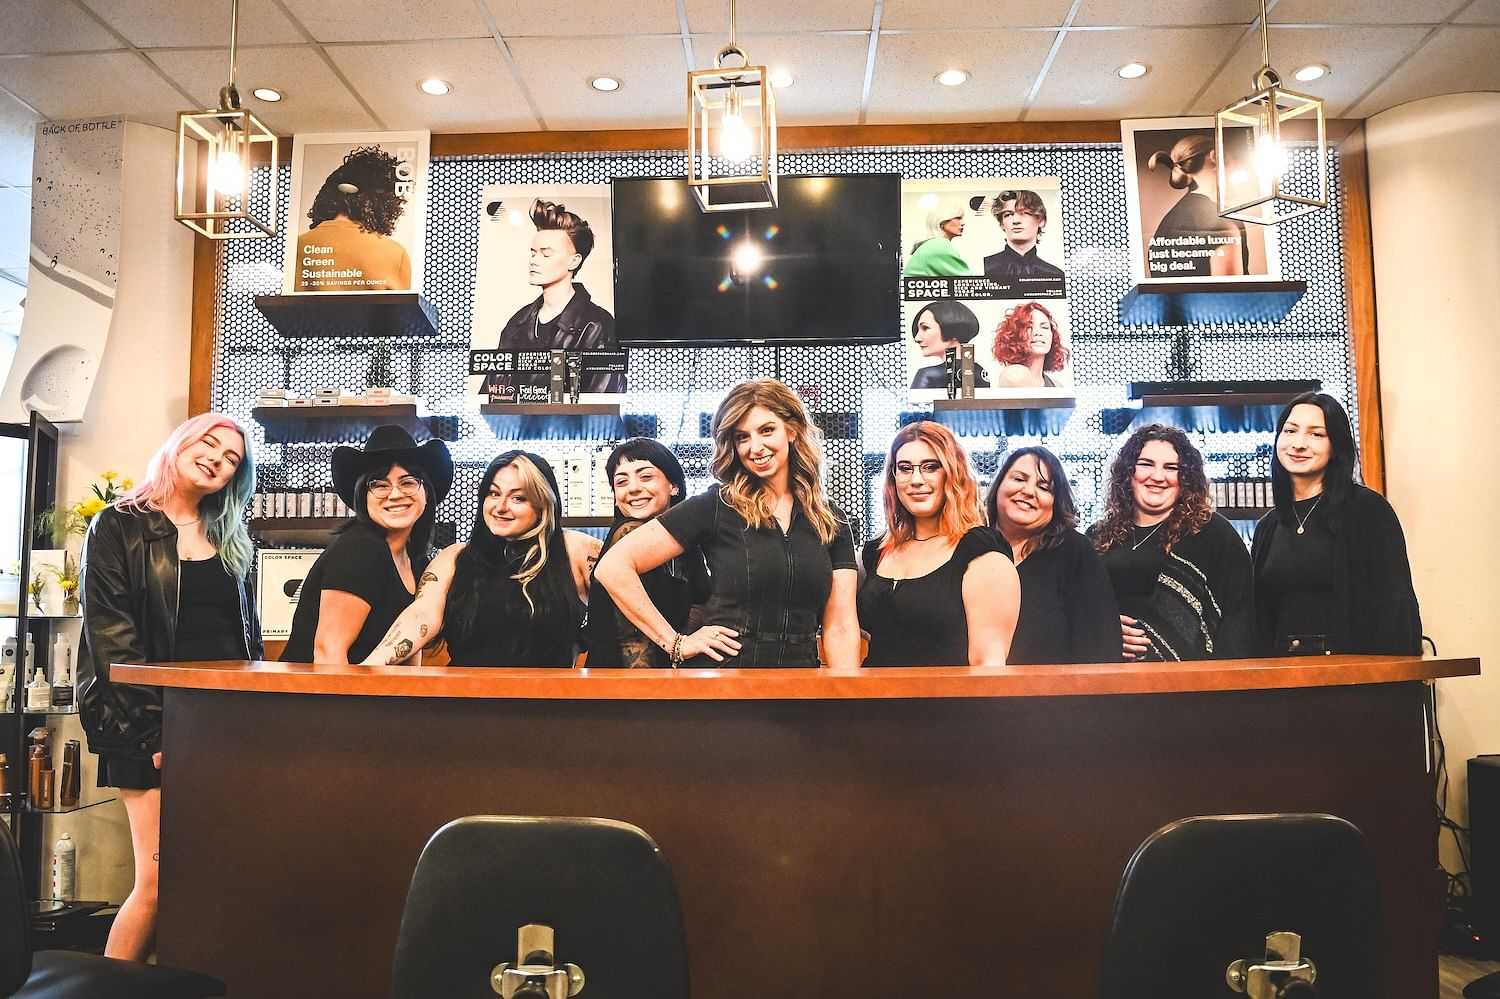 Salon staff smiling behind the reception desk with hairstyle posters in the background.